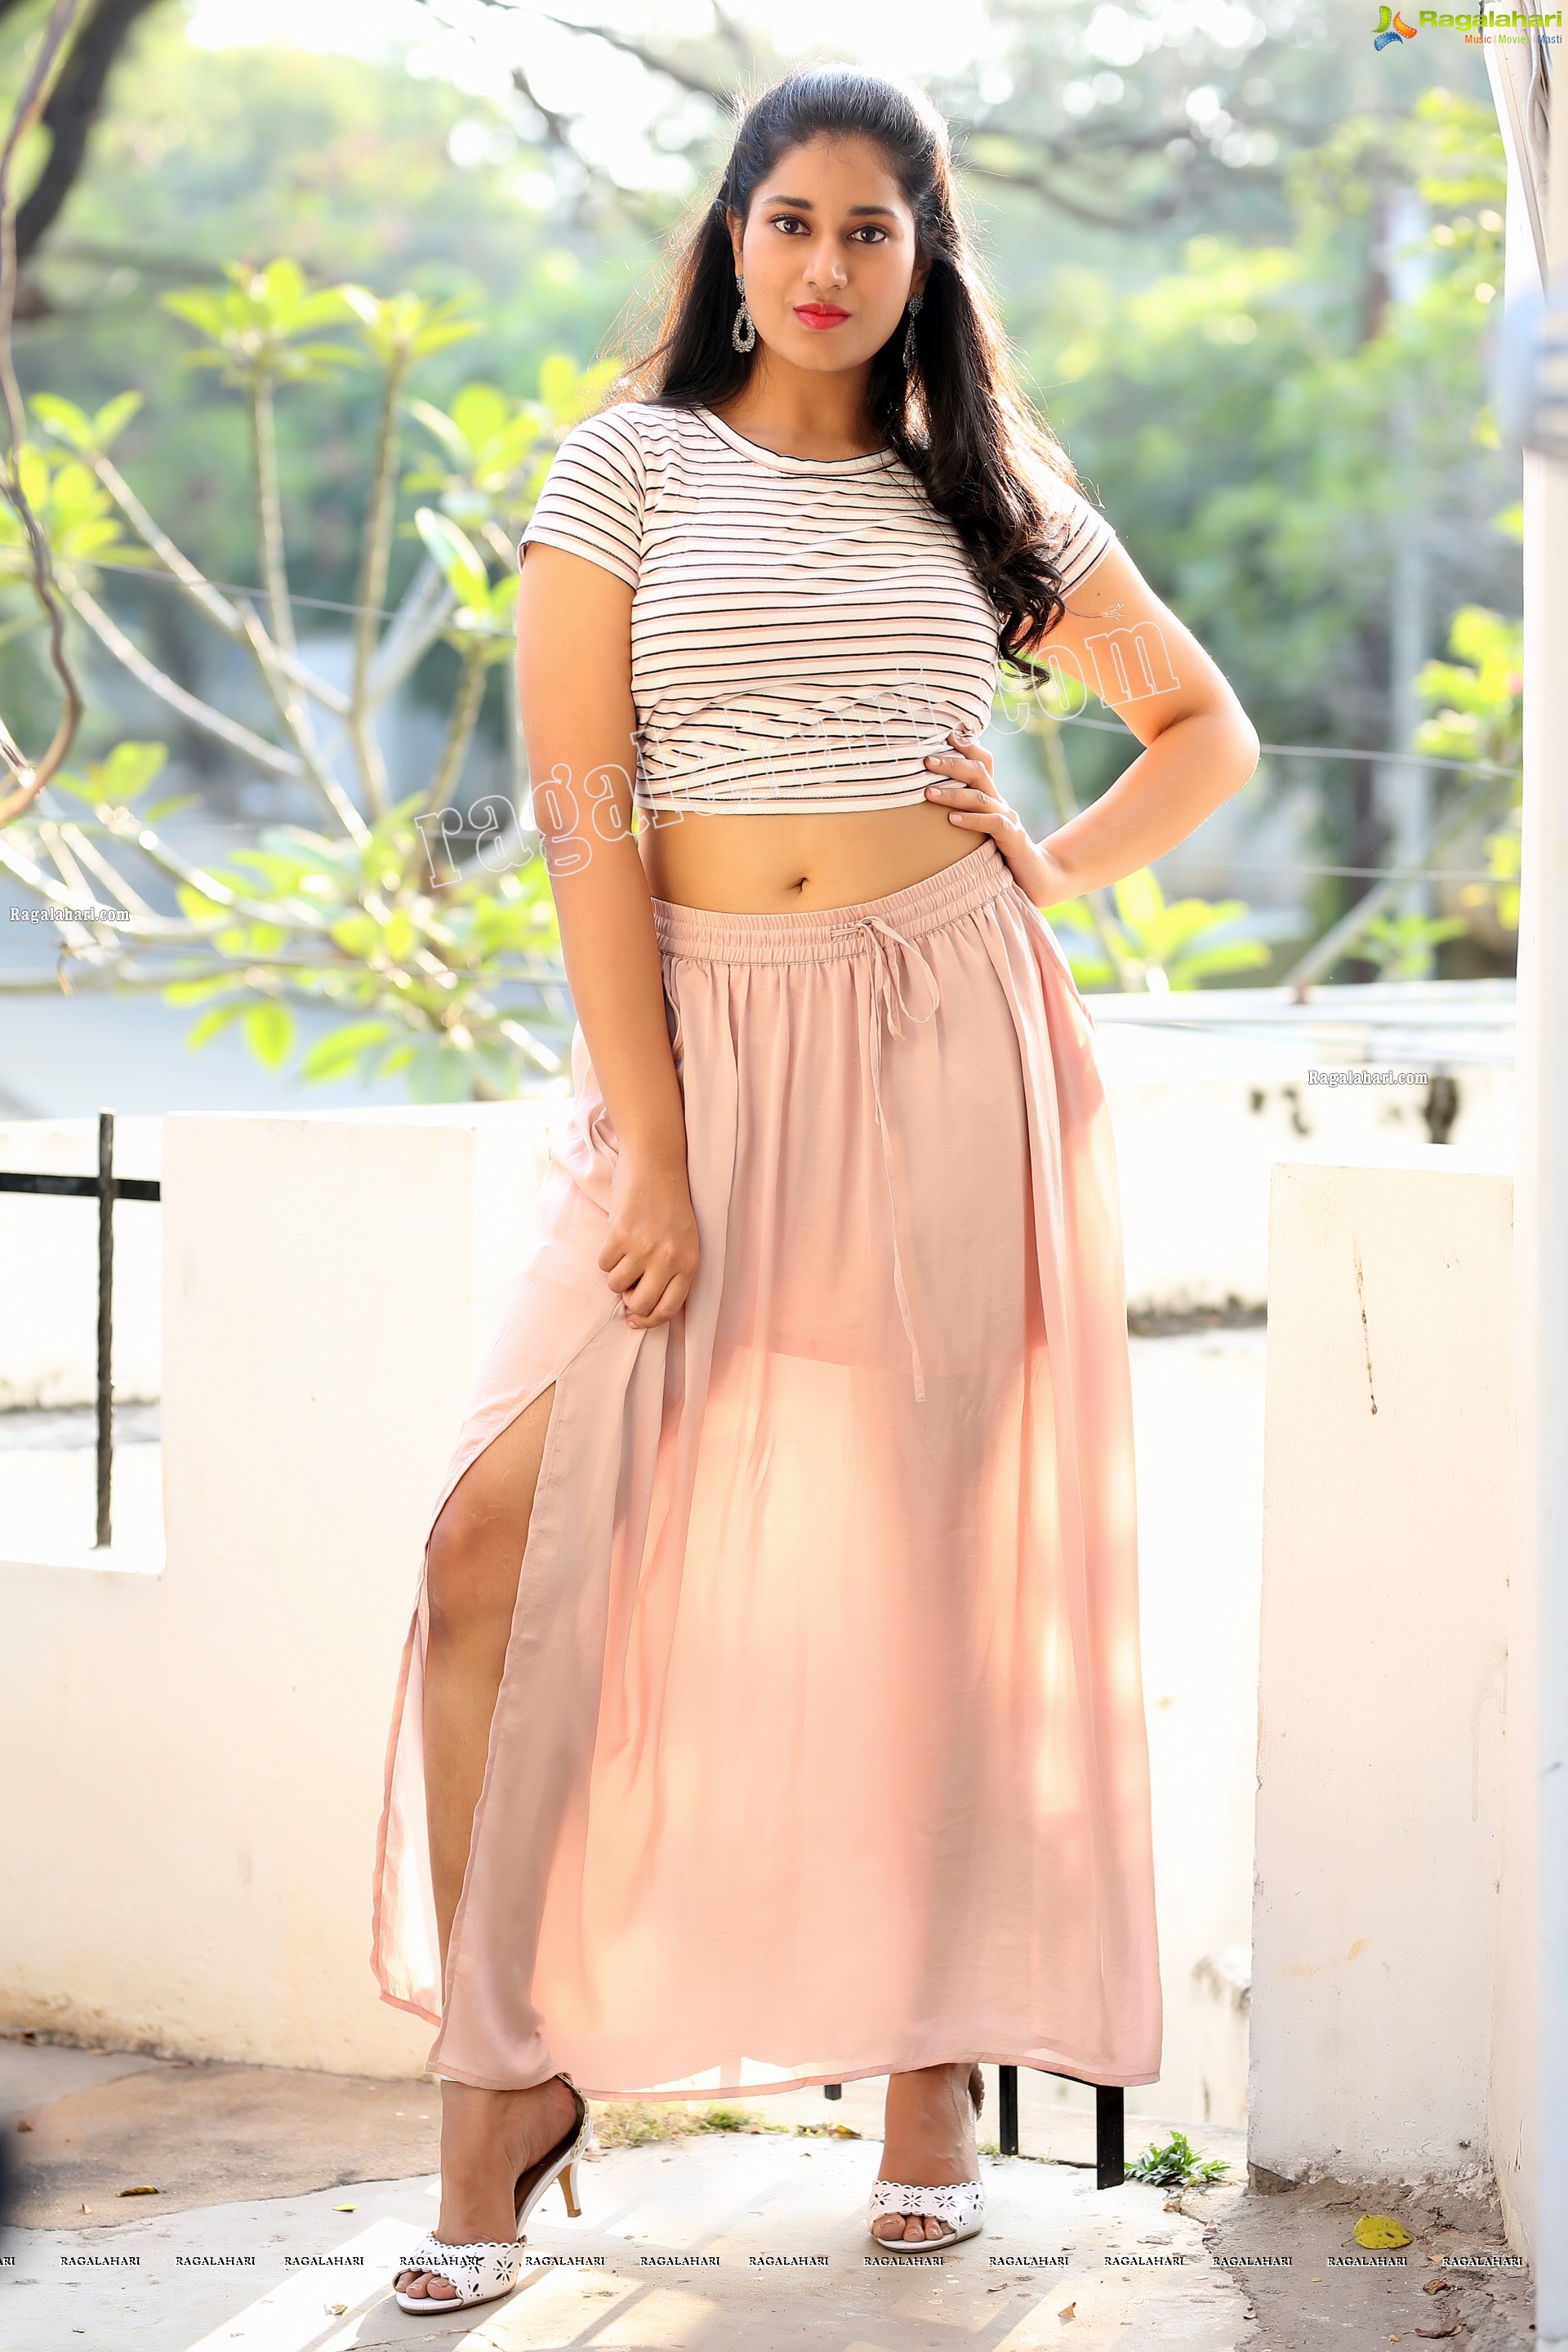 Akhila Ram in Pastel Pink Skirt and Stripes Top, Exclusive Photo Shoot